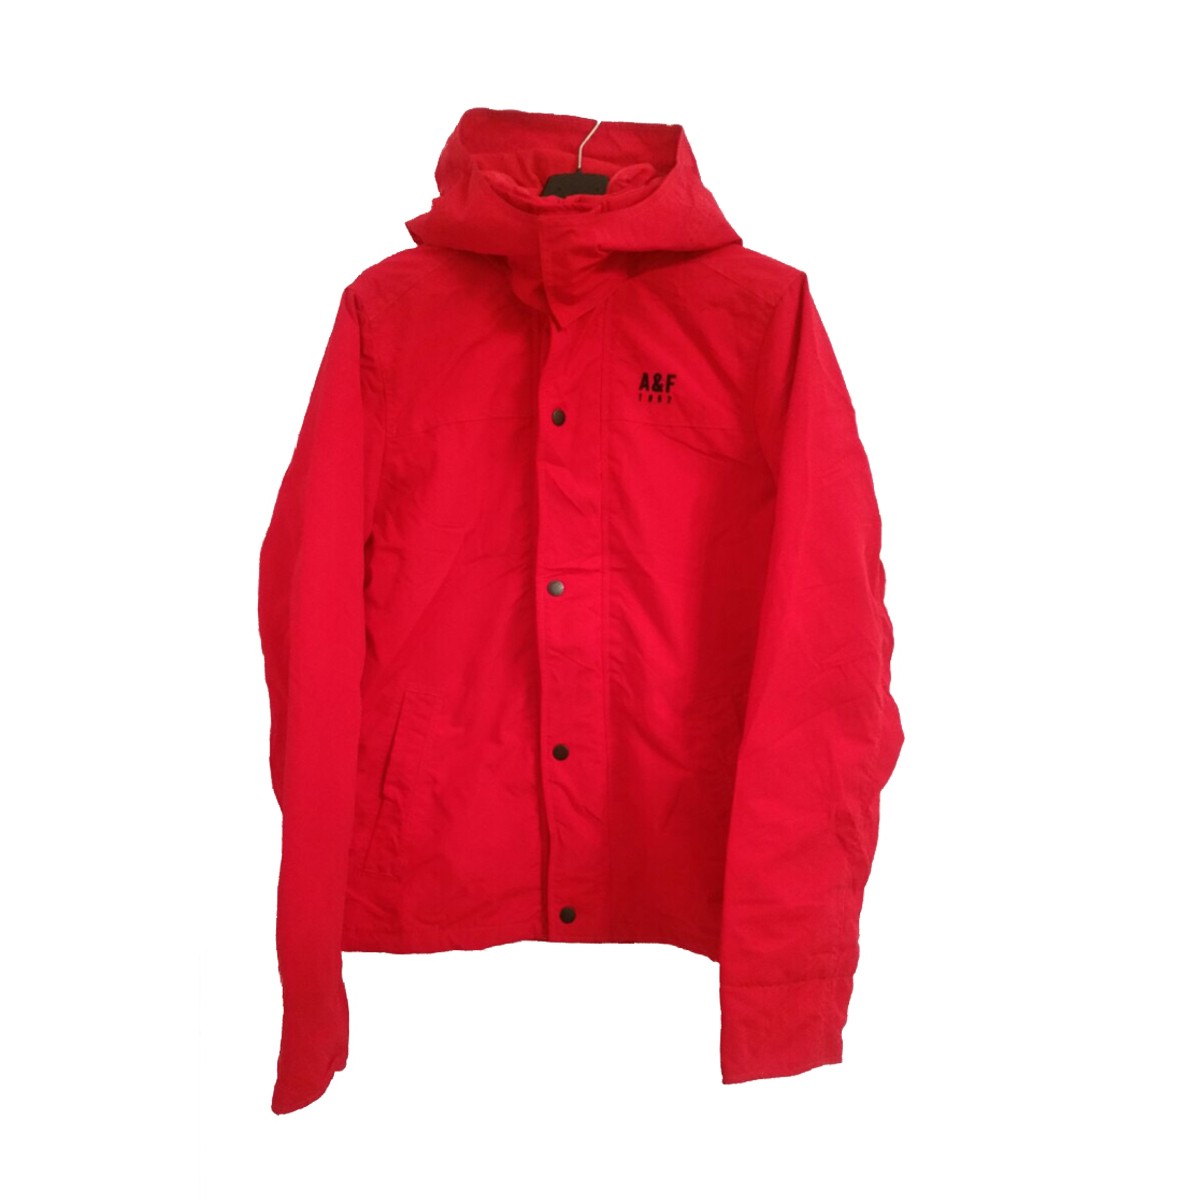 abercrombie red jacket